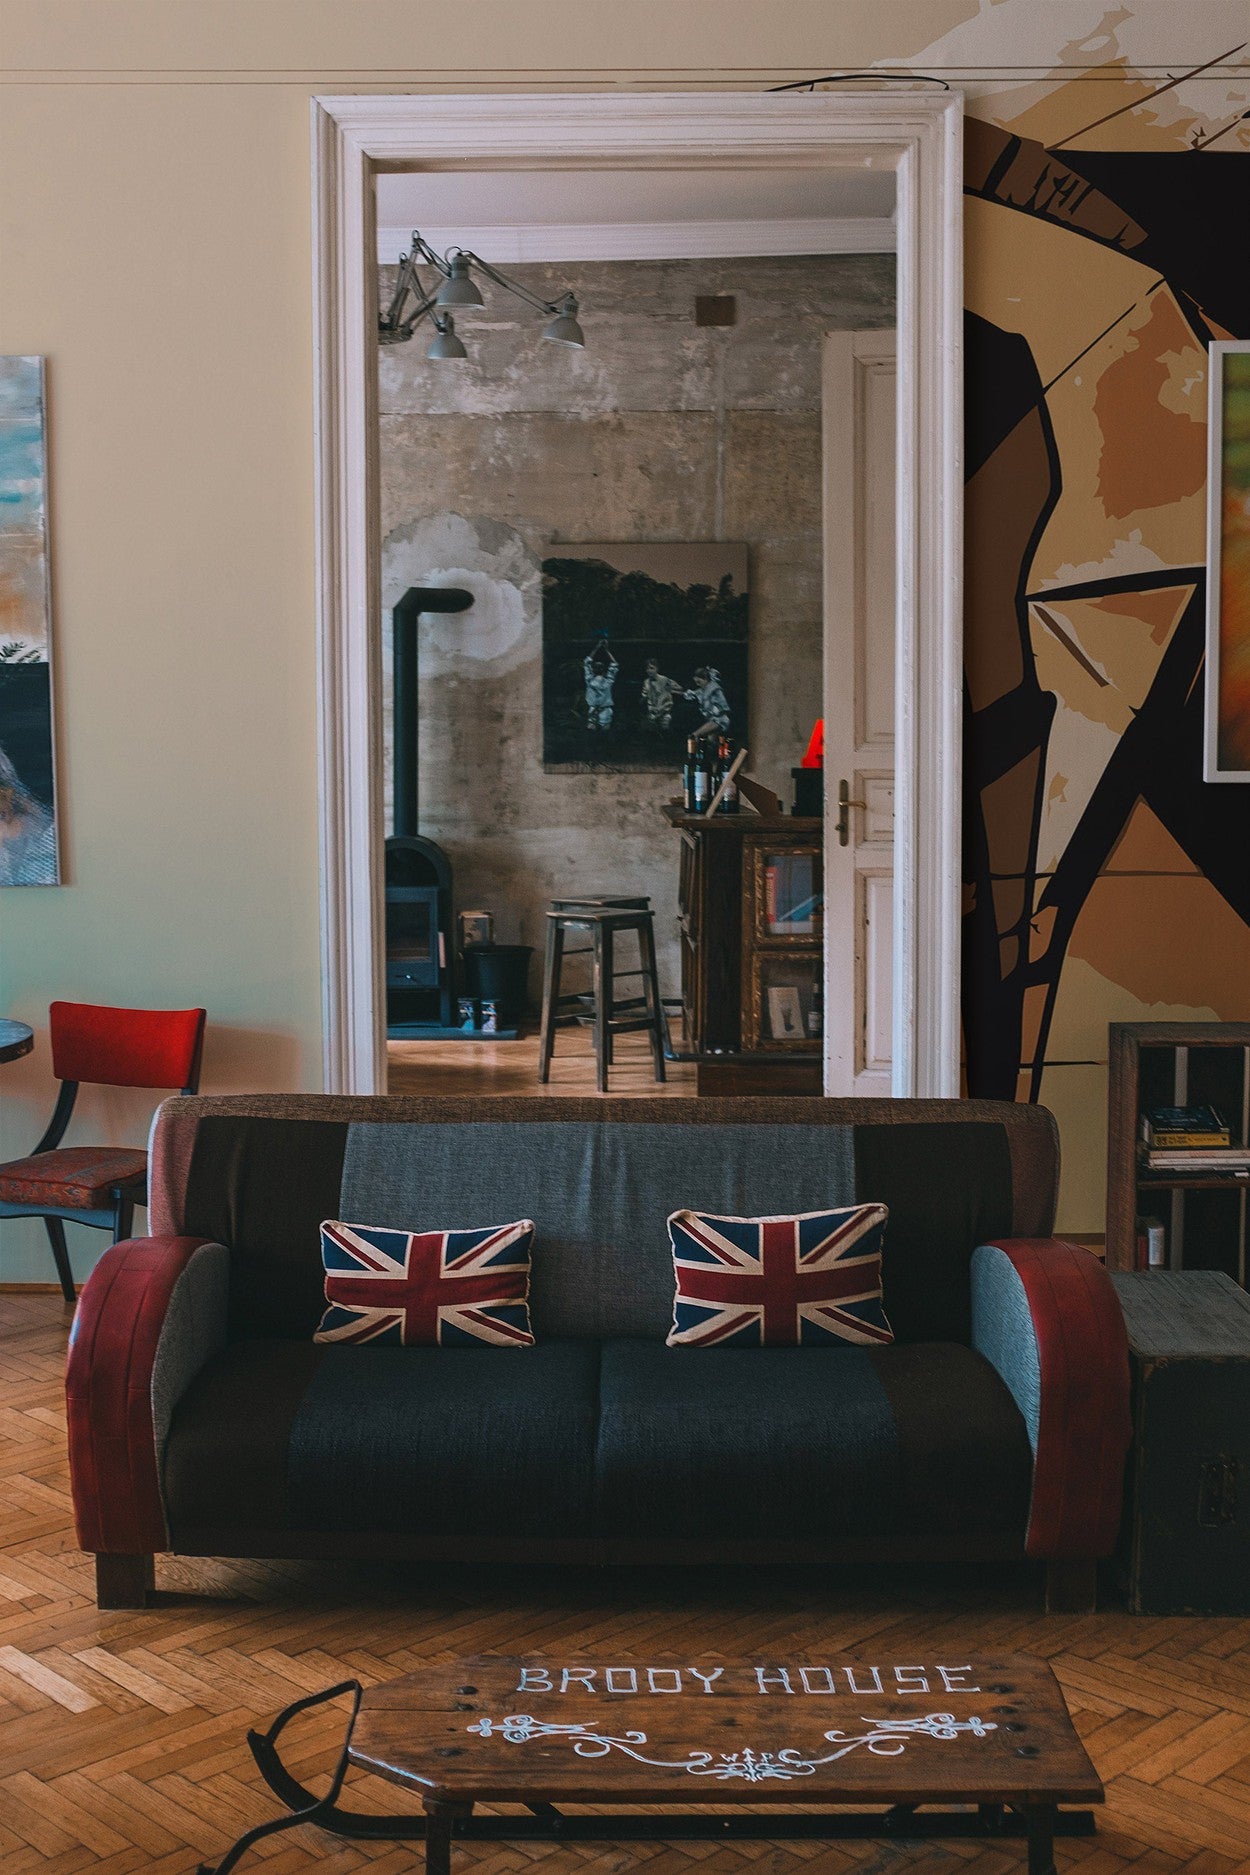 A modern living room interior with a wall mural, red sofa with cushions featuring the British flag, and decorative elements